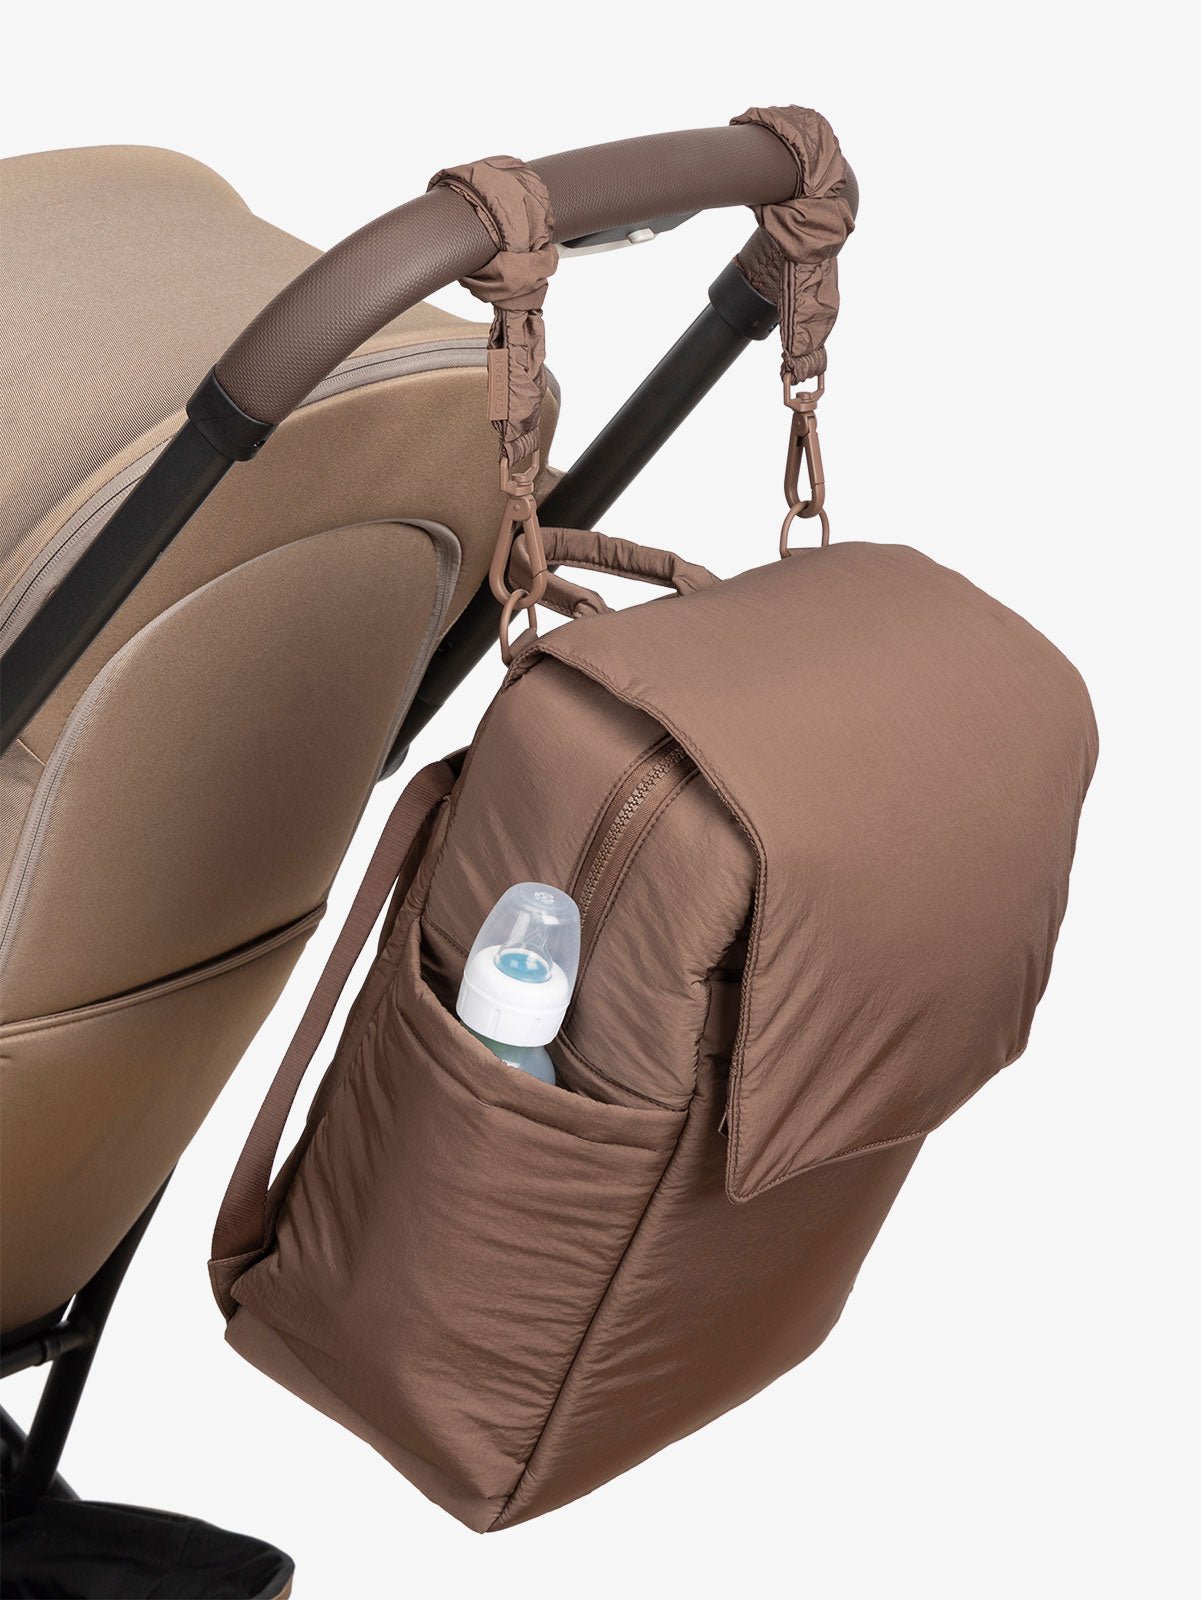 CALPAK Diaper Backpack with Laptop Sleeve attached to stroller by CALPAK Stroller Straps in hazelnut